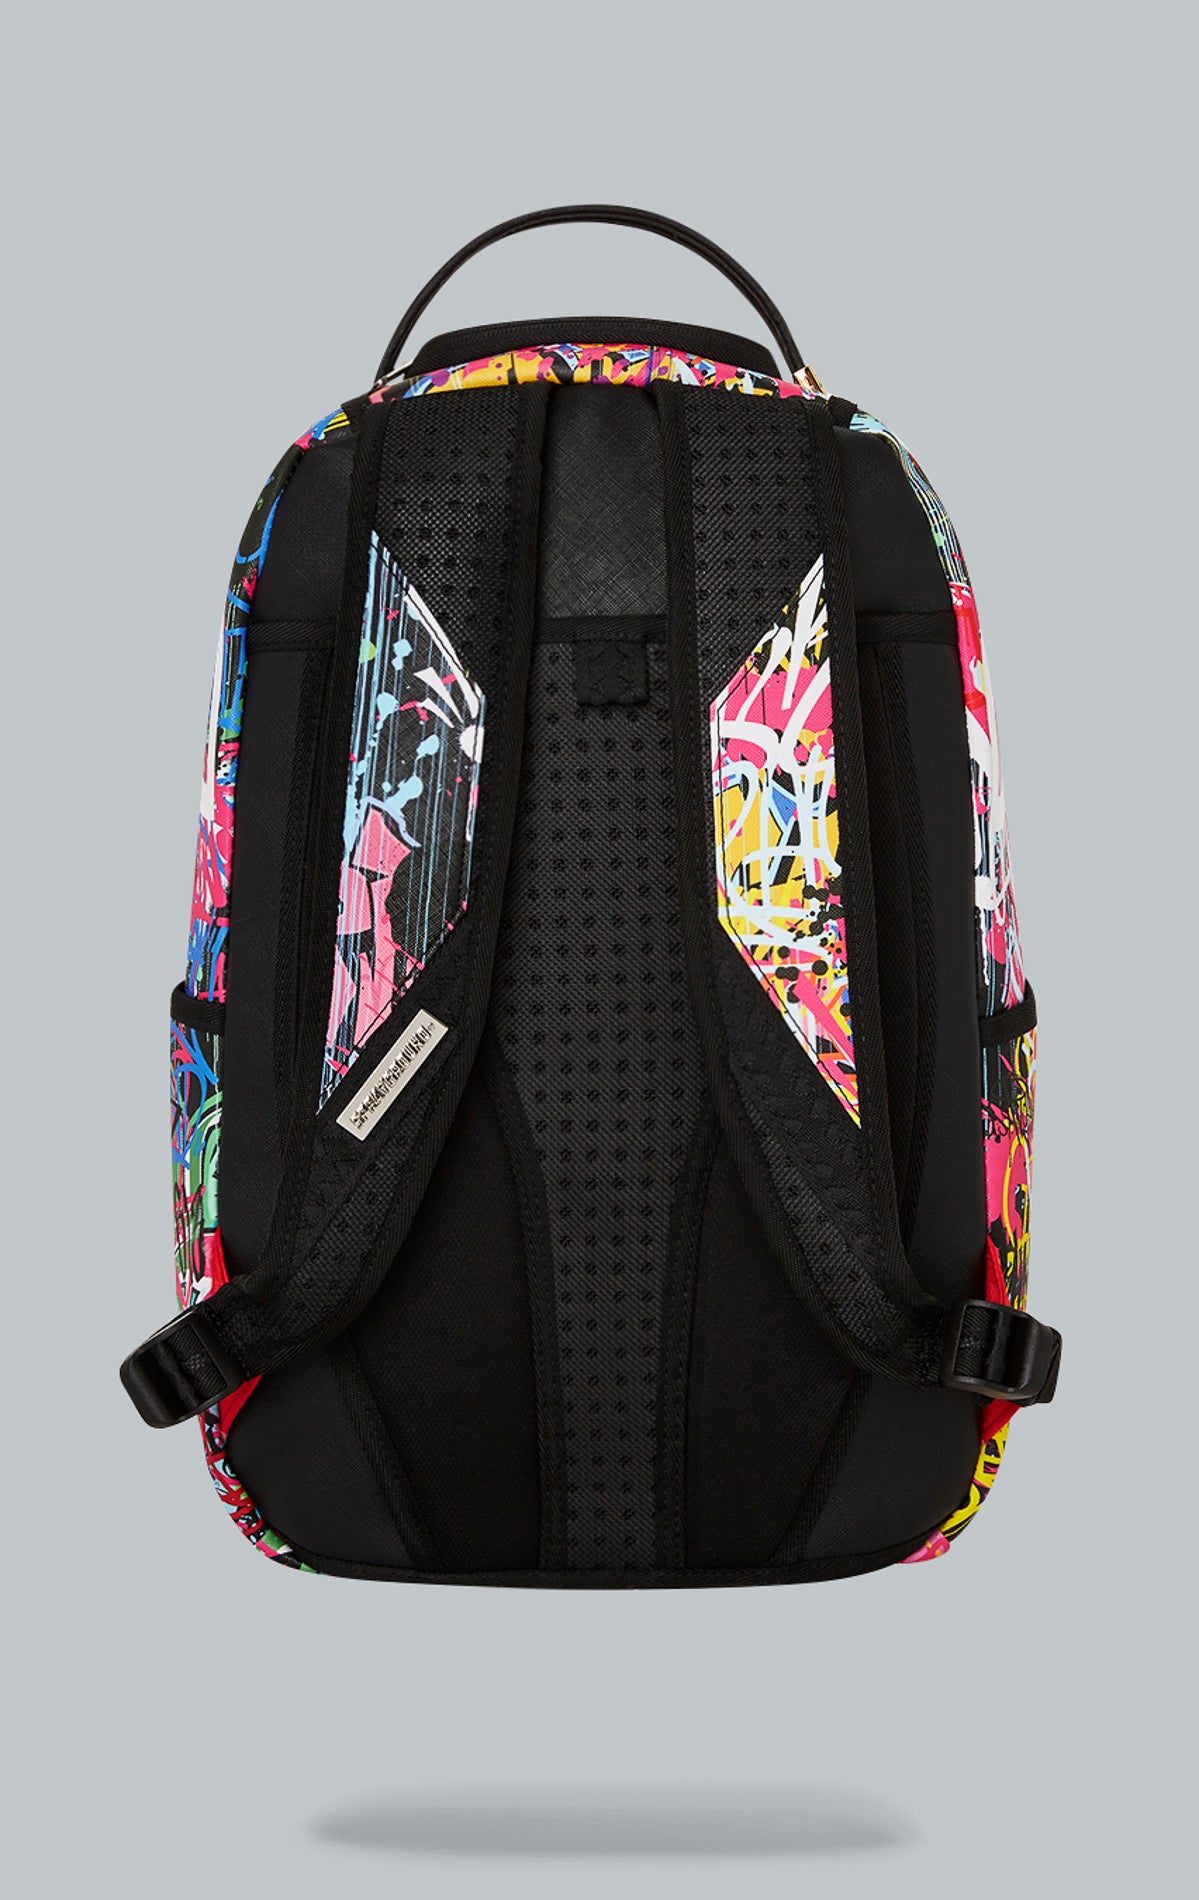 Sprayground Lower East Side Shark Backpack. The backpack is made from durable water-resistant faux leather (100%) and features a black exterior with a shark graphic. It includes a front zipper pocket, side pockets, a zippered stash pocket, a separate velour sunglass compartment, ergonomic mesh back padding, adjustable straps, gold zippers with metal hardware, and a metal 